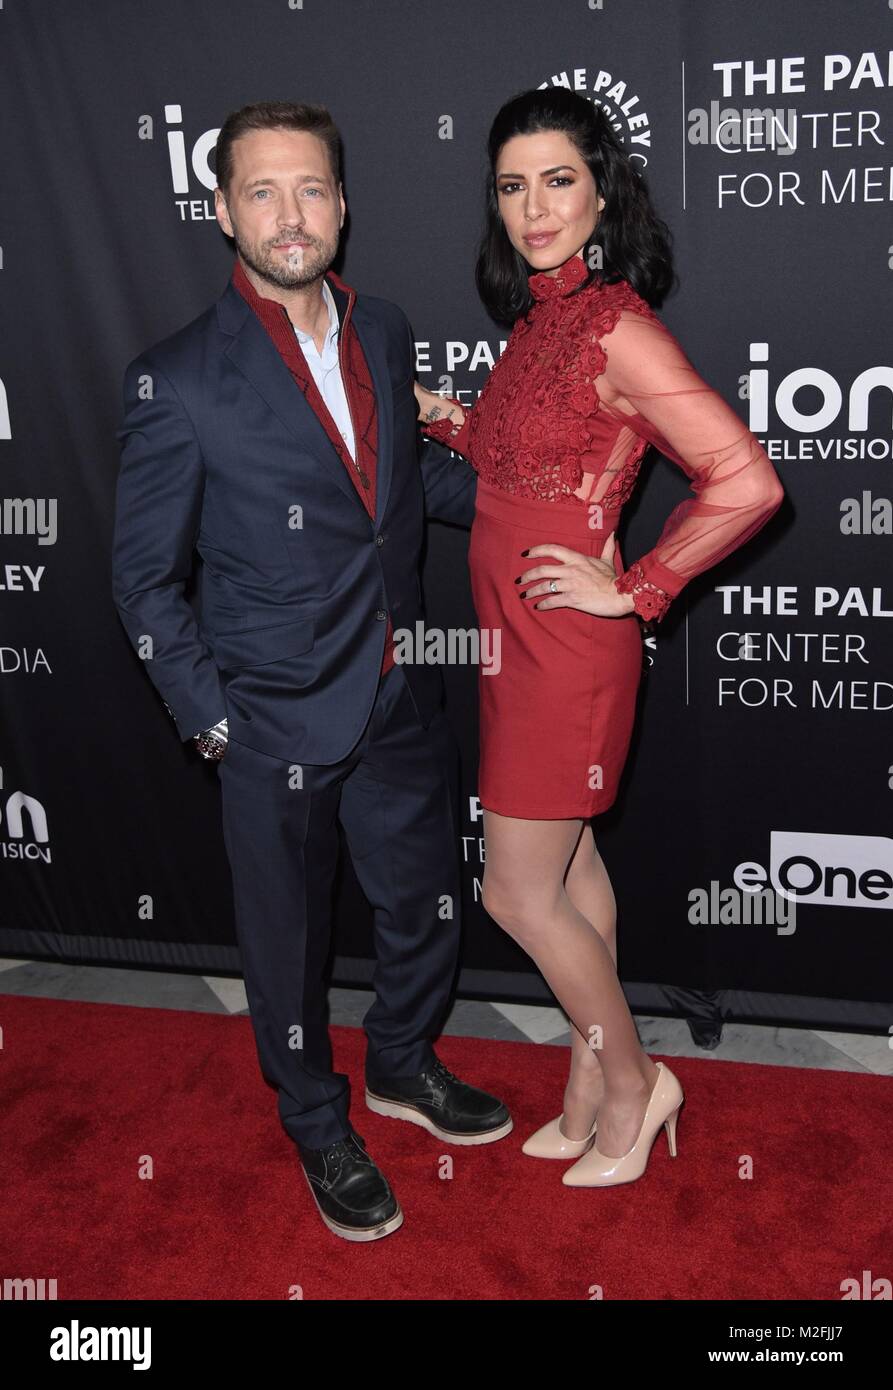 New York, NY, USA. 7th Feb, 2018. Jason Priestley, Cindy Sampson at arrivals for ION Television's PRIVATE EYES Preview Screening and Discussion, The Paley Center for Media, New York, NY February 7, 2018. Credit: Derek Storm/Everett Collection/Alamy Live News Stock Photo